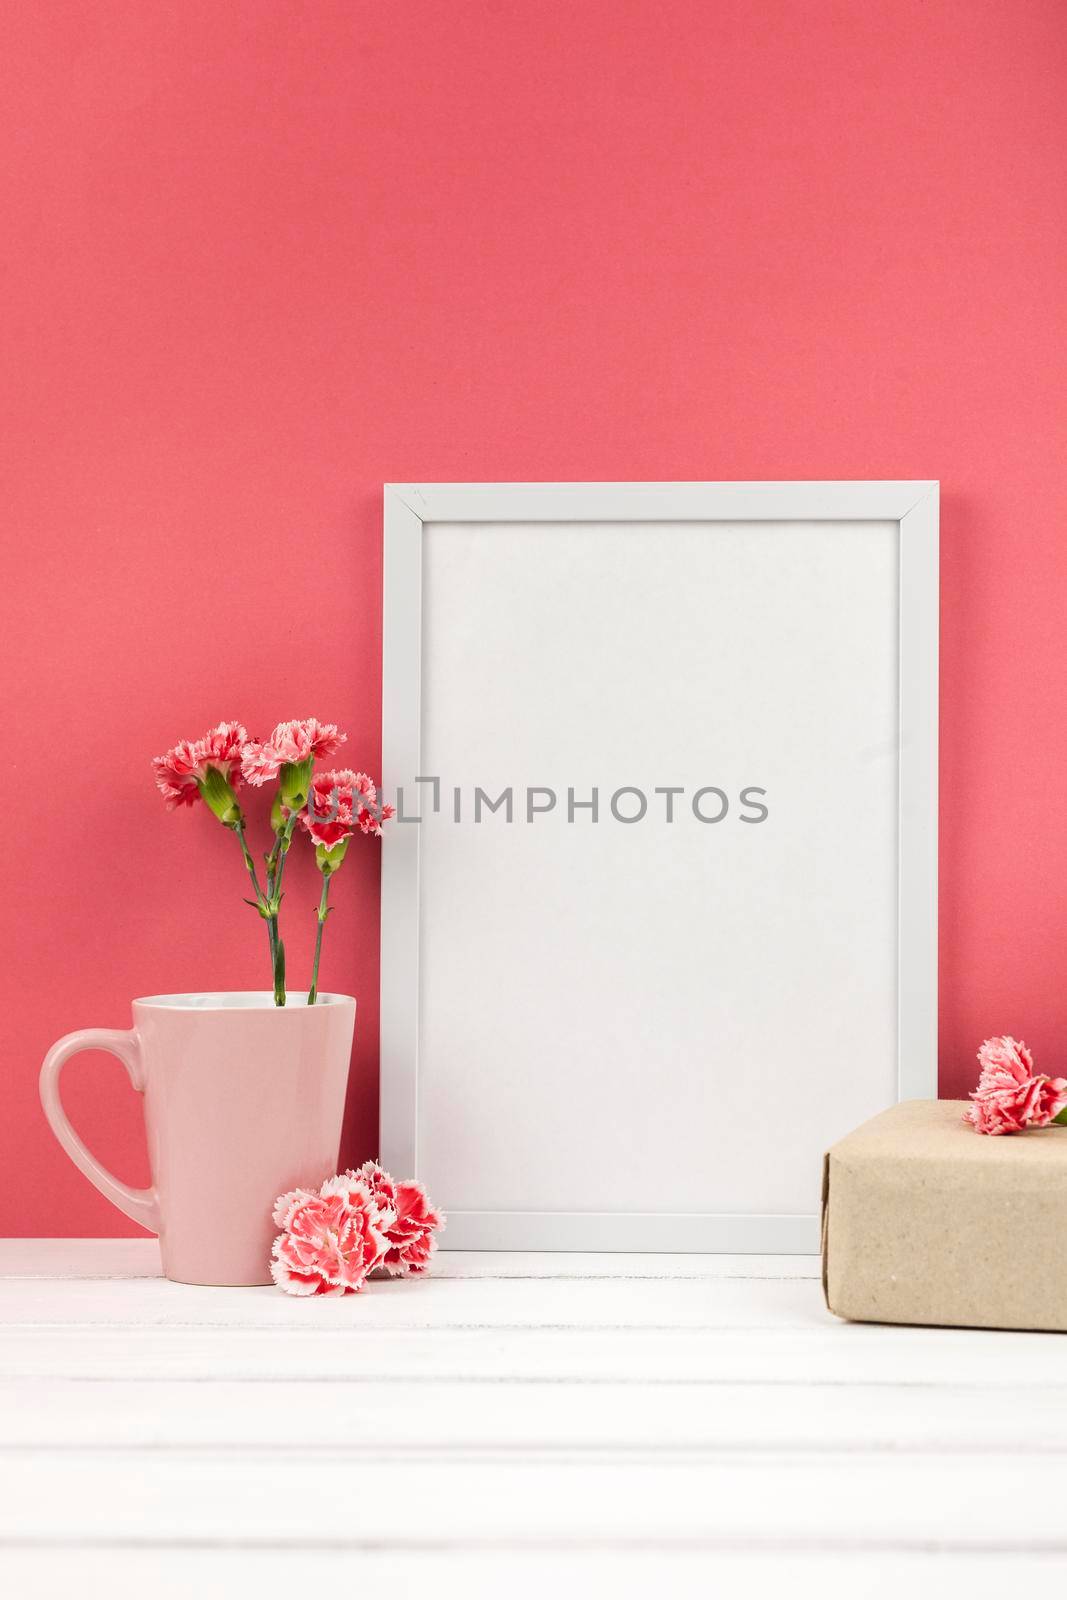 carnation flowers gift box cup white empty frame table. High quality photo by Zahard